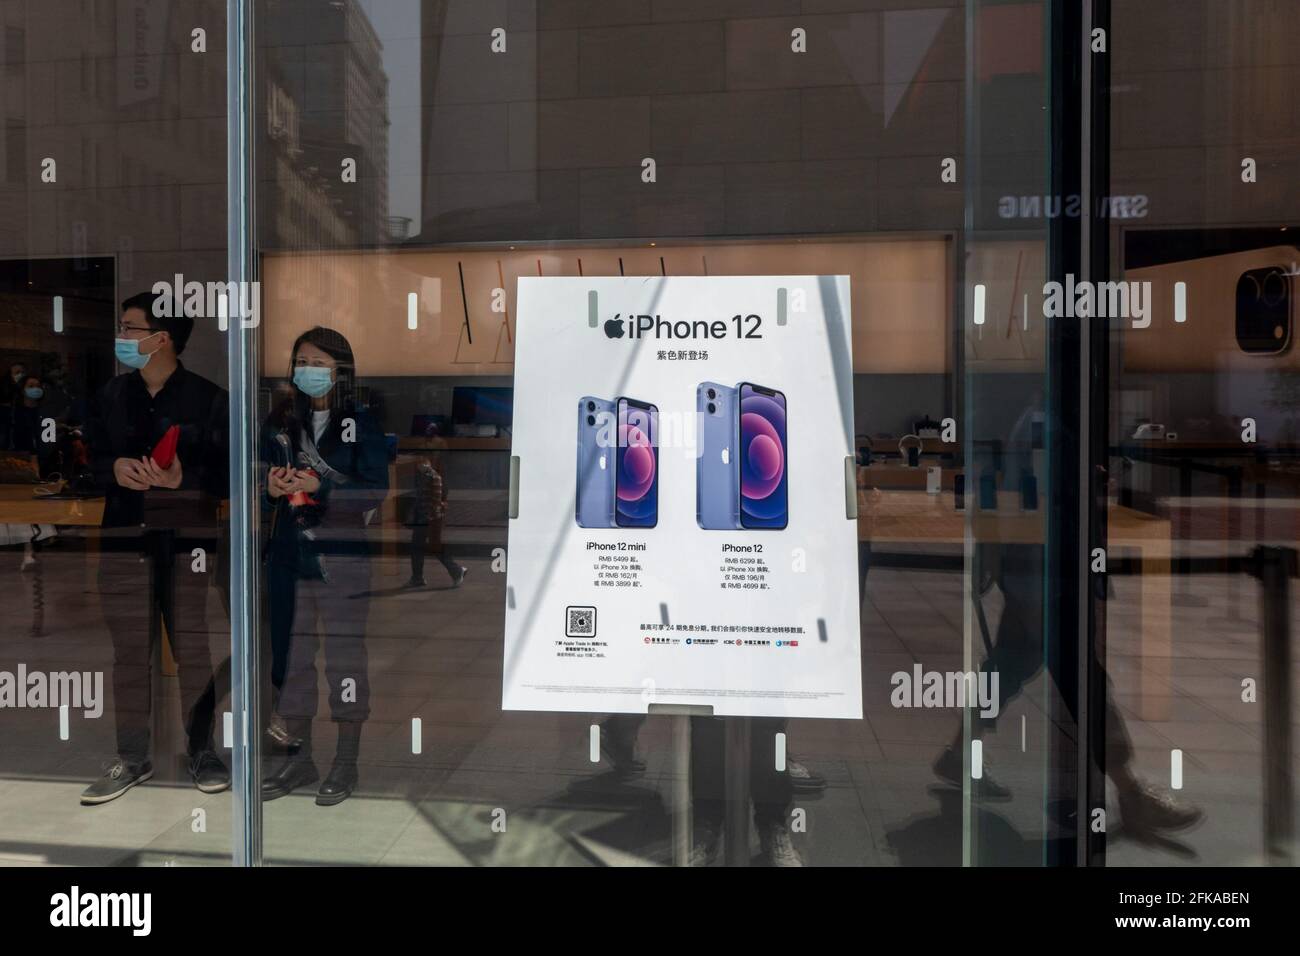 Shanghai China April 30 21 Iphone 12 12 Mini Purple Poster Is Seen At An Apple Store In Shanghai China April 30 21 Photo By Wang Gang Costfoto Sipa Usa Stock Photo Alamy